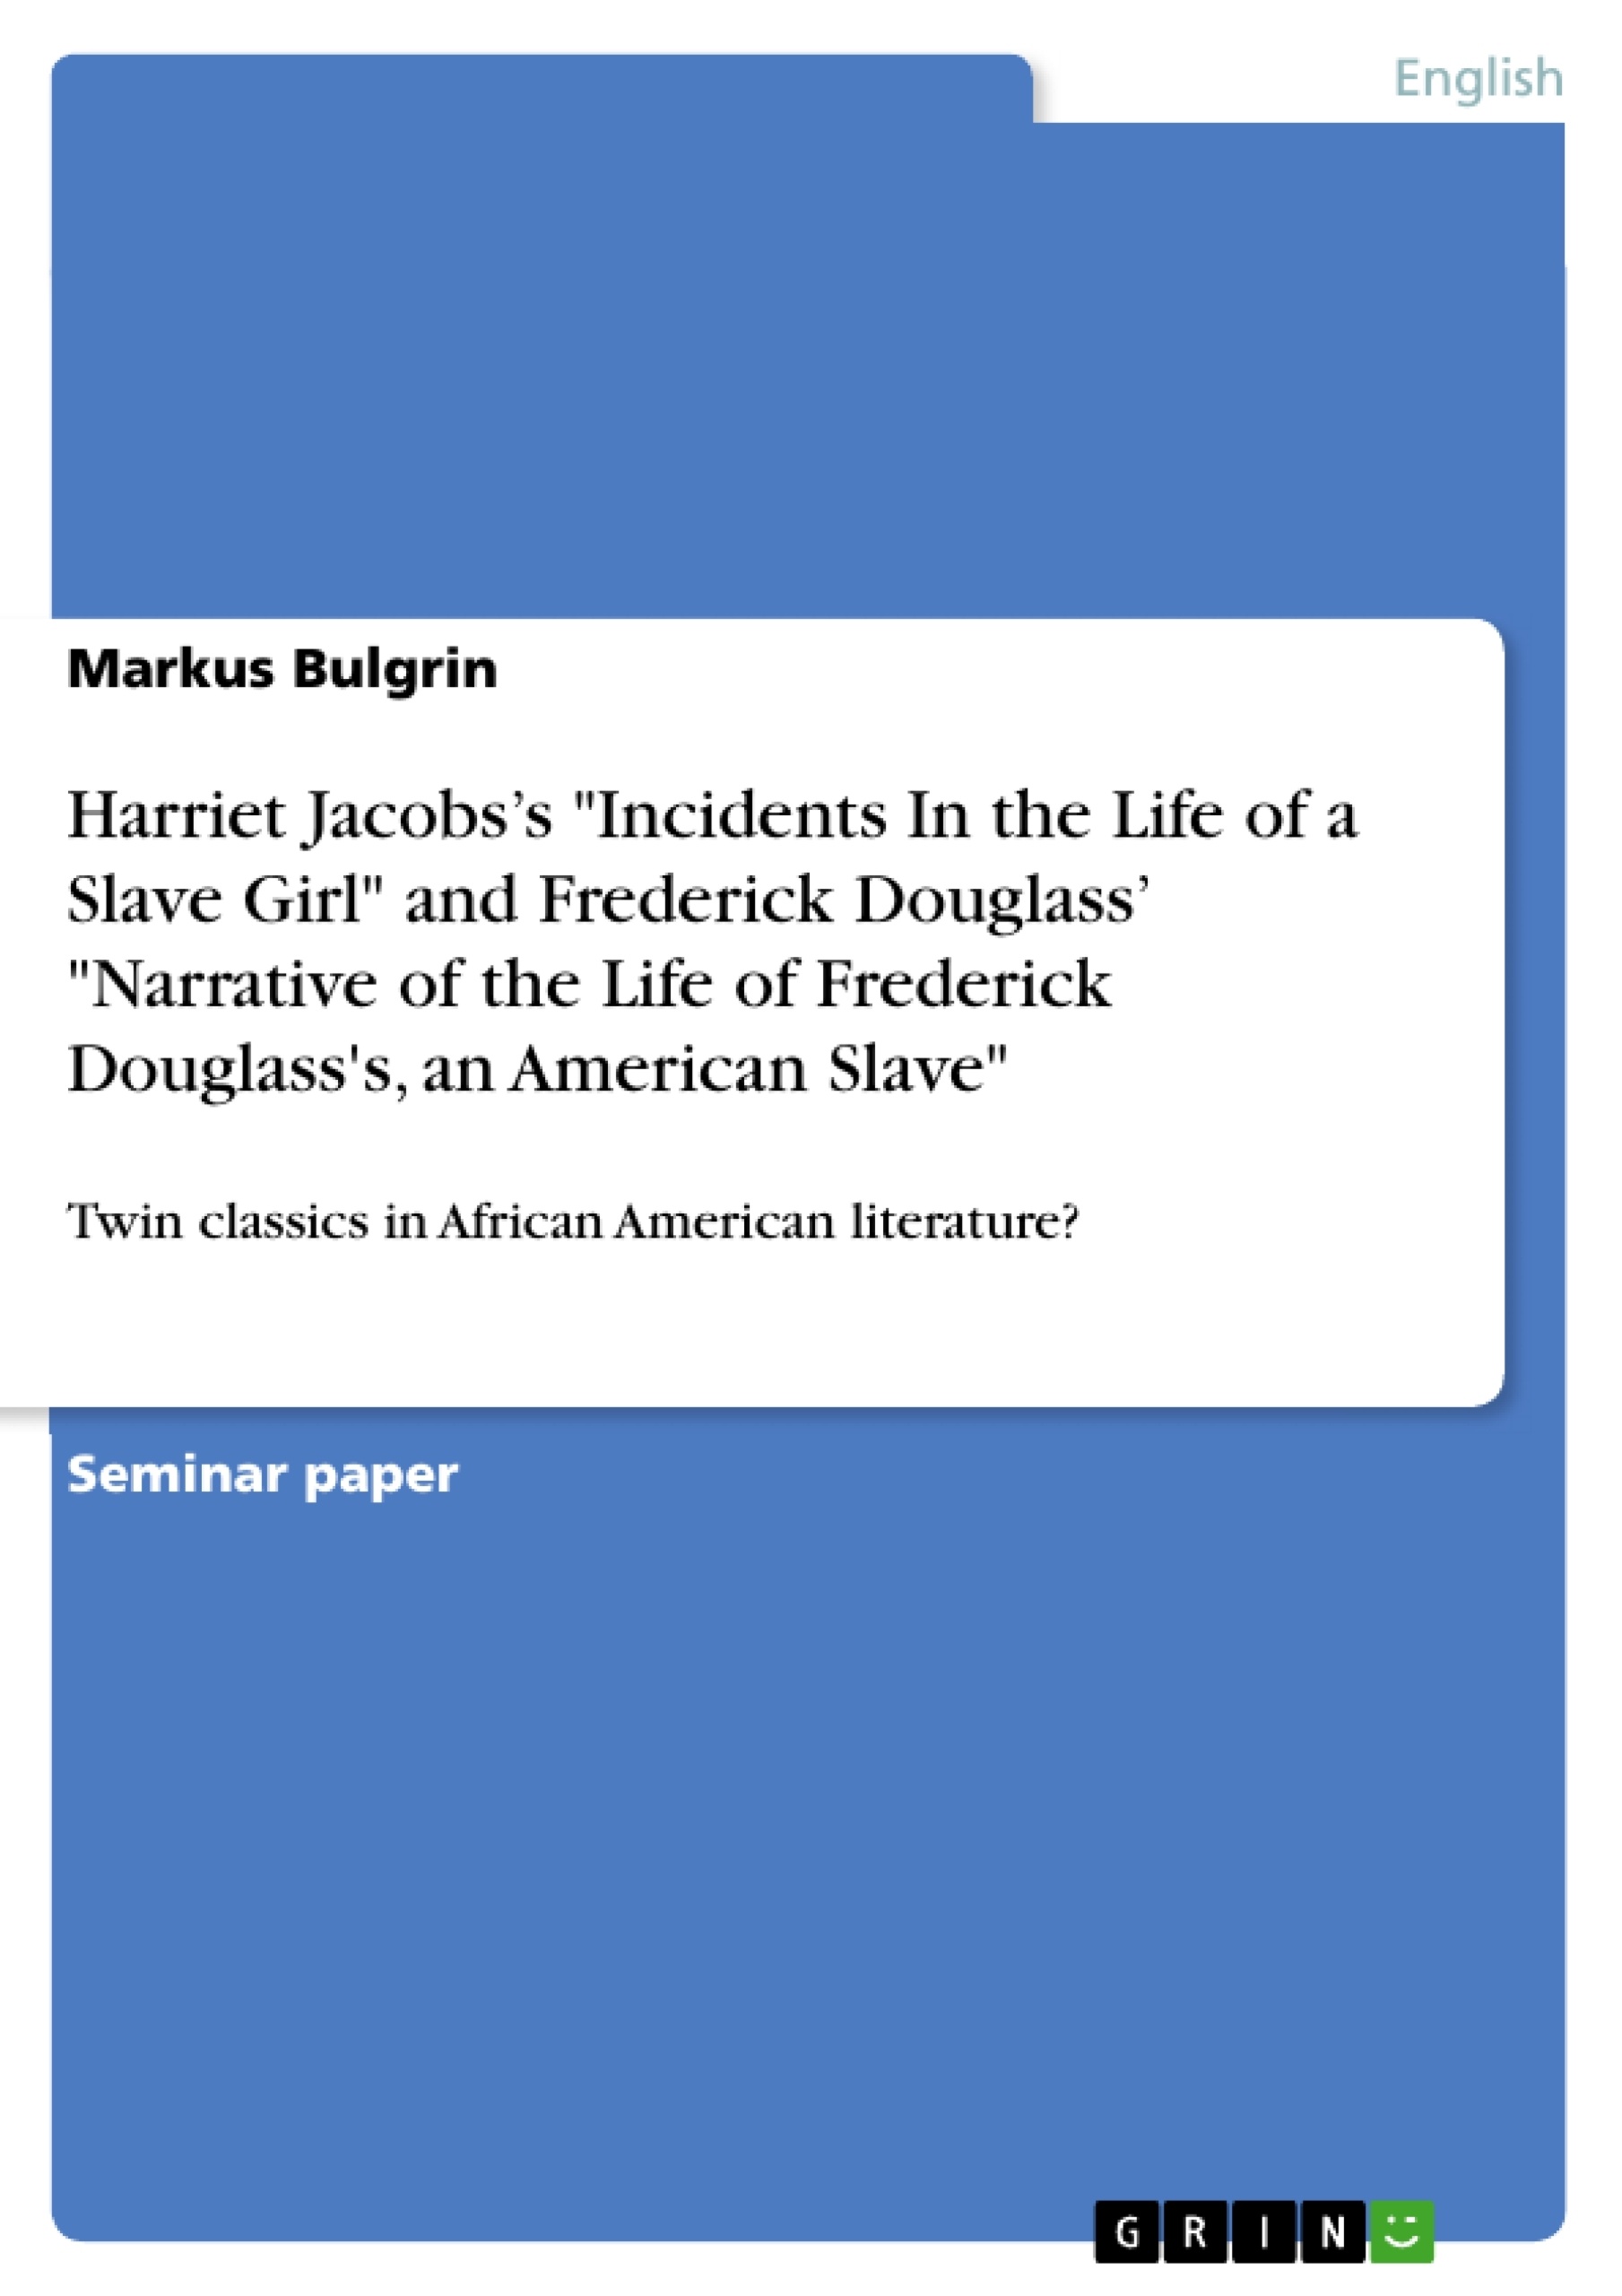 Title: Harriet Jacobs’s "Incidents In the Life of a Slave Girl" and Frederick Douglass’ "Narrative of the Life of Frederick Douglass's, an American Slave"